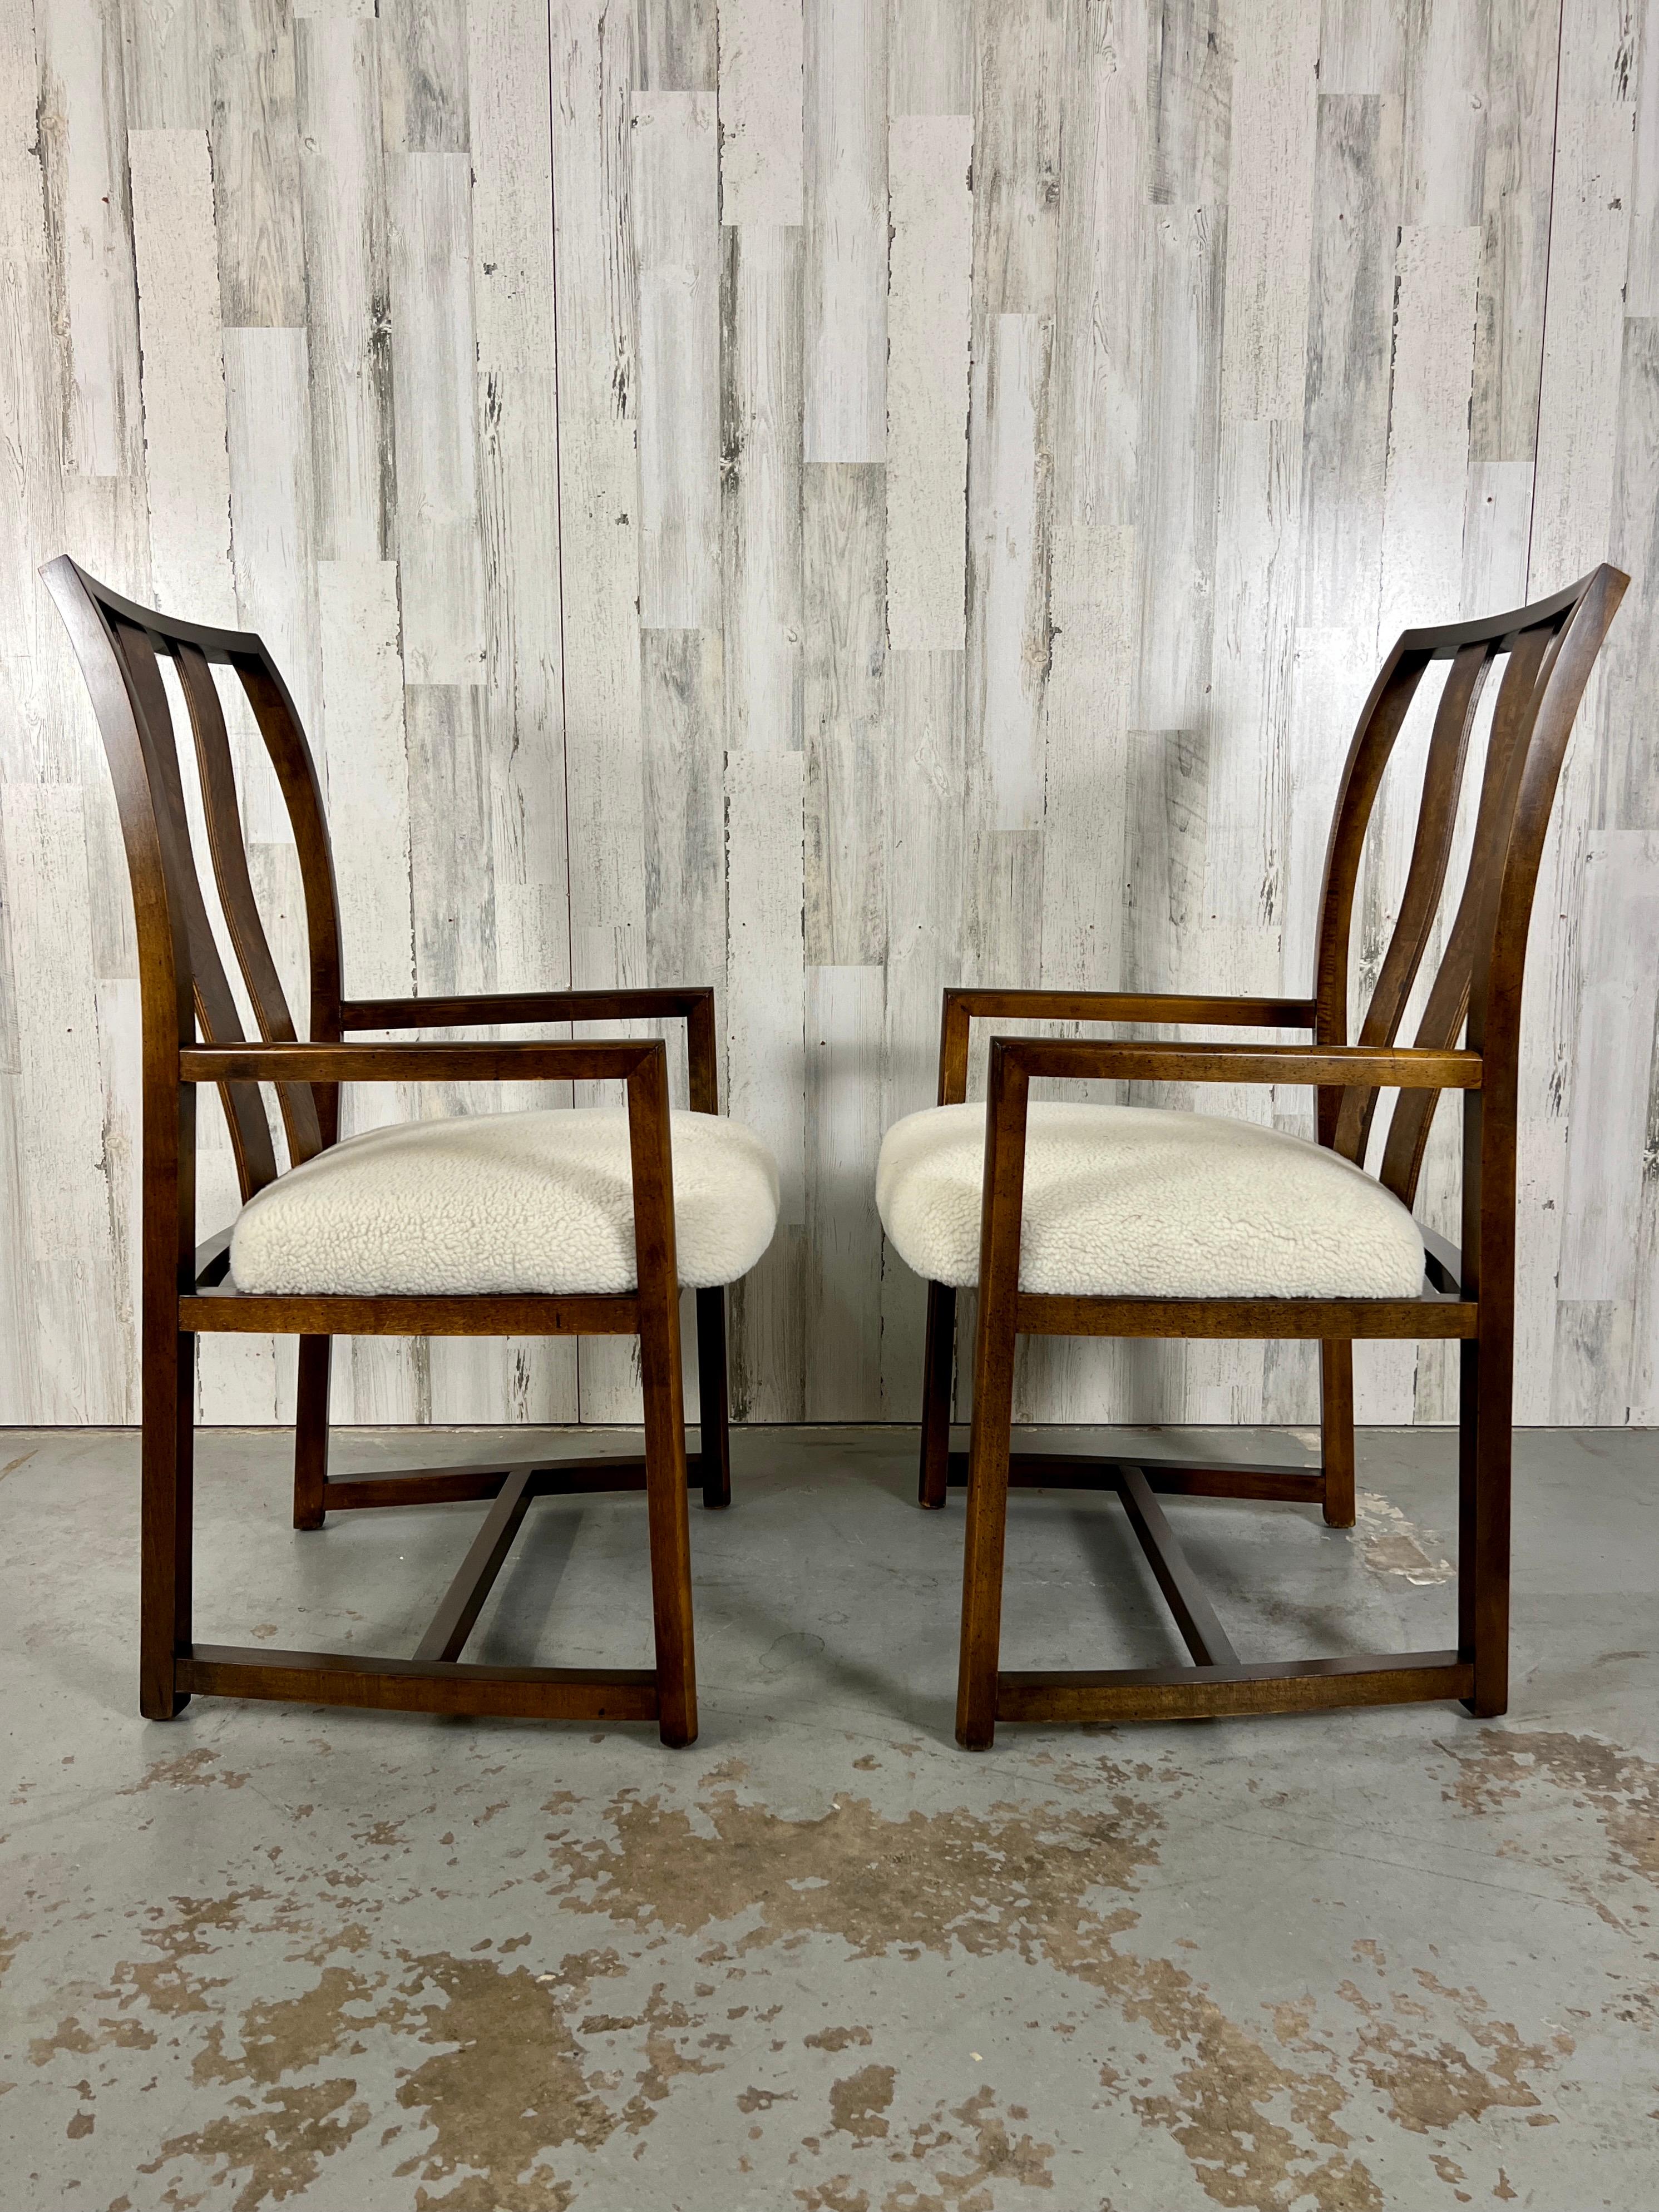 North American 1980s Modernist Dining Chairs with Burl Wood Back Splat For Sale